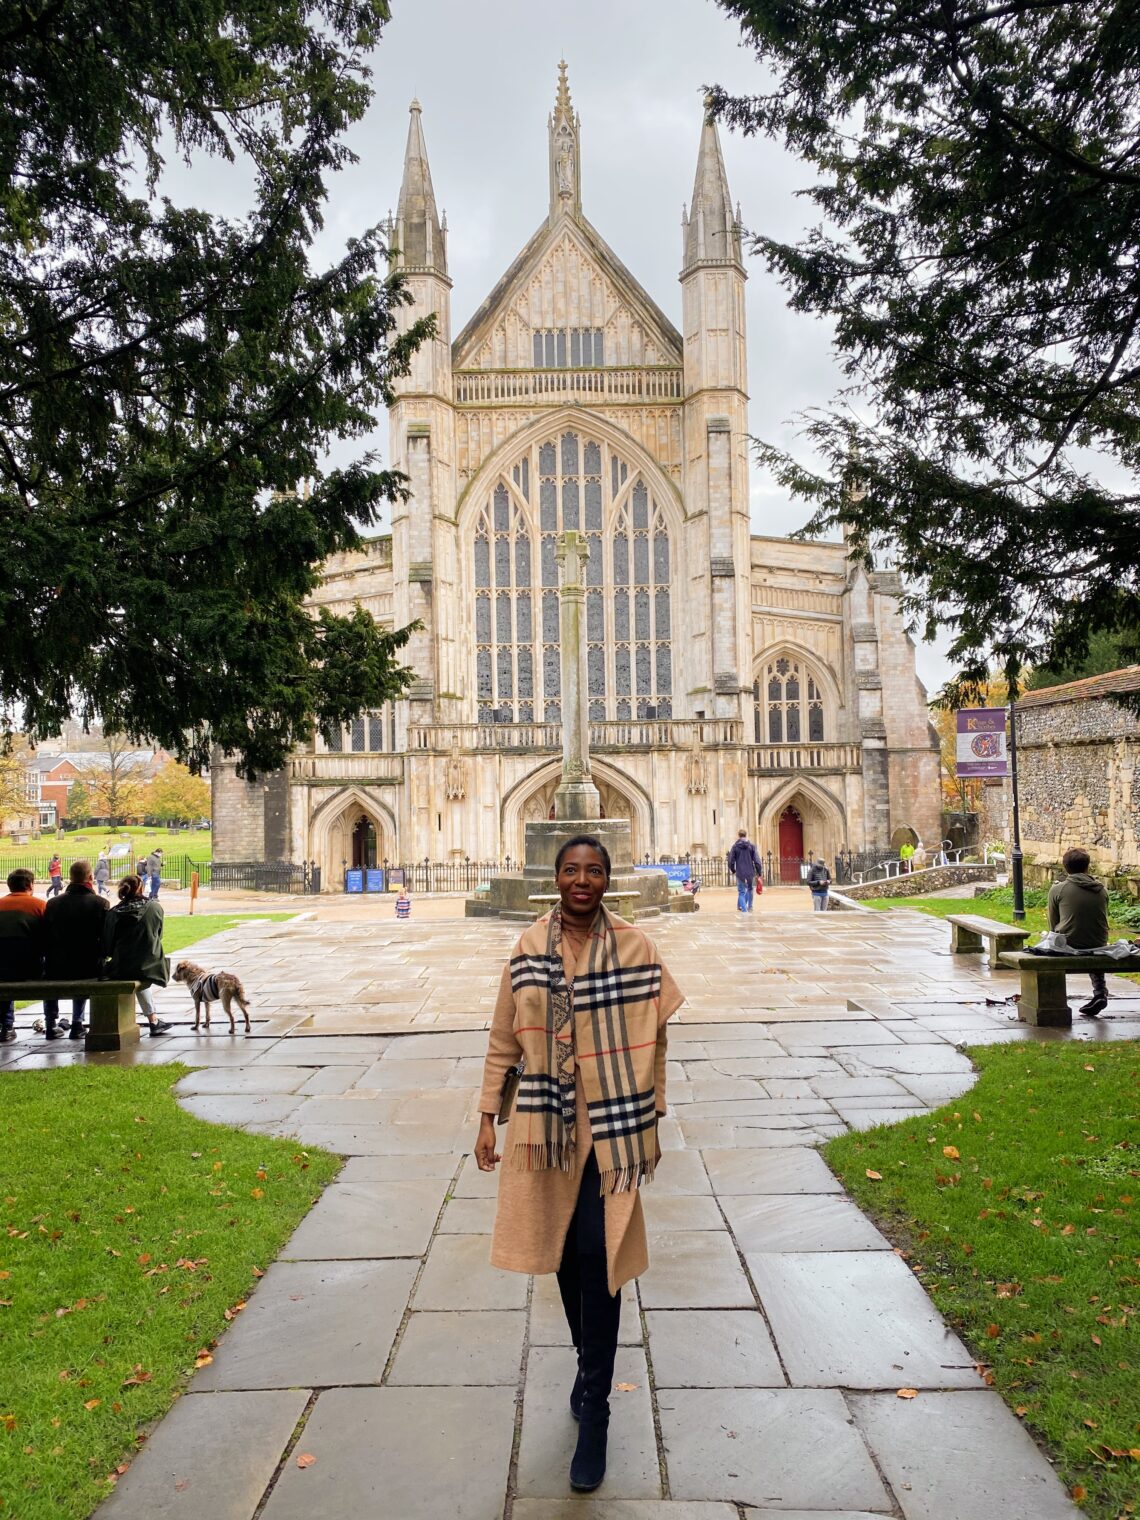 Unplanned day trip to Winchester - LifeWithBugo